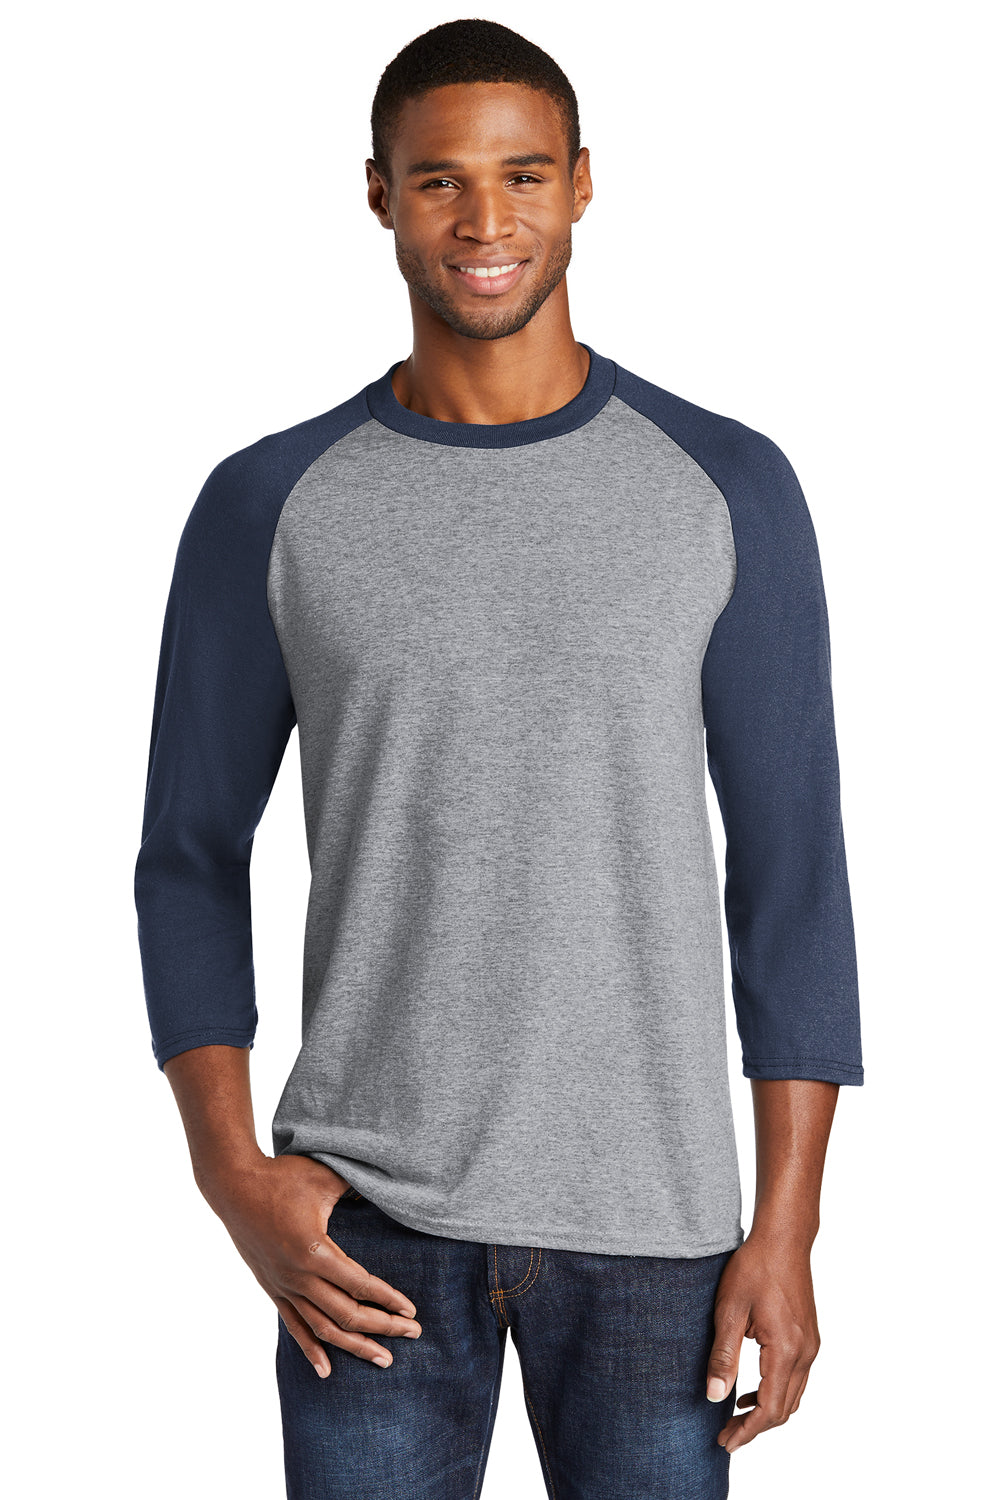 Port & Company PC55RS Mens Core Moisture Wicking 3/4 Sleeve Crewneck T-Shirt Heather Grey/Navy Blue Front